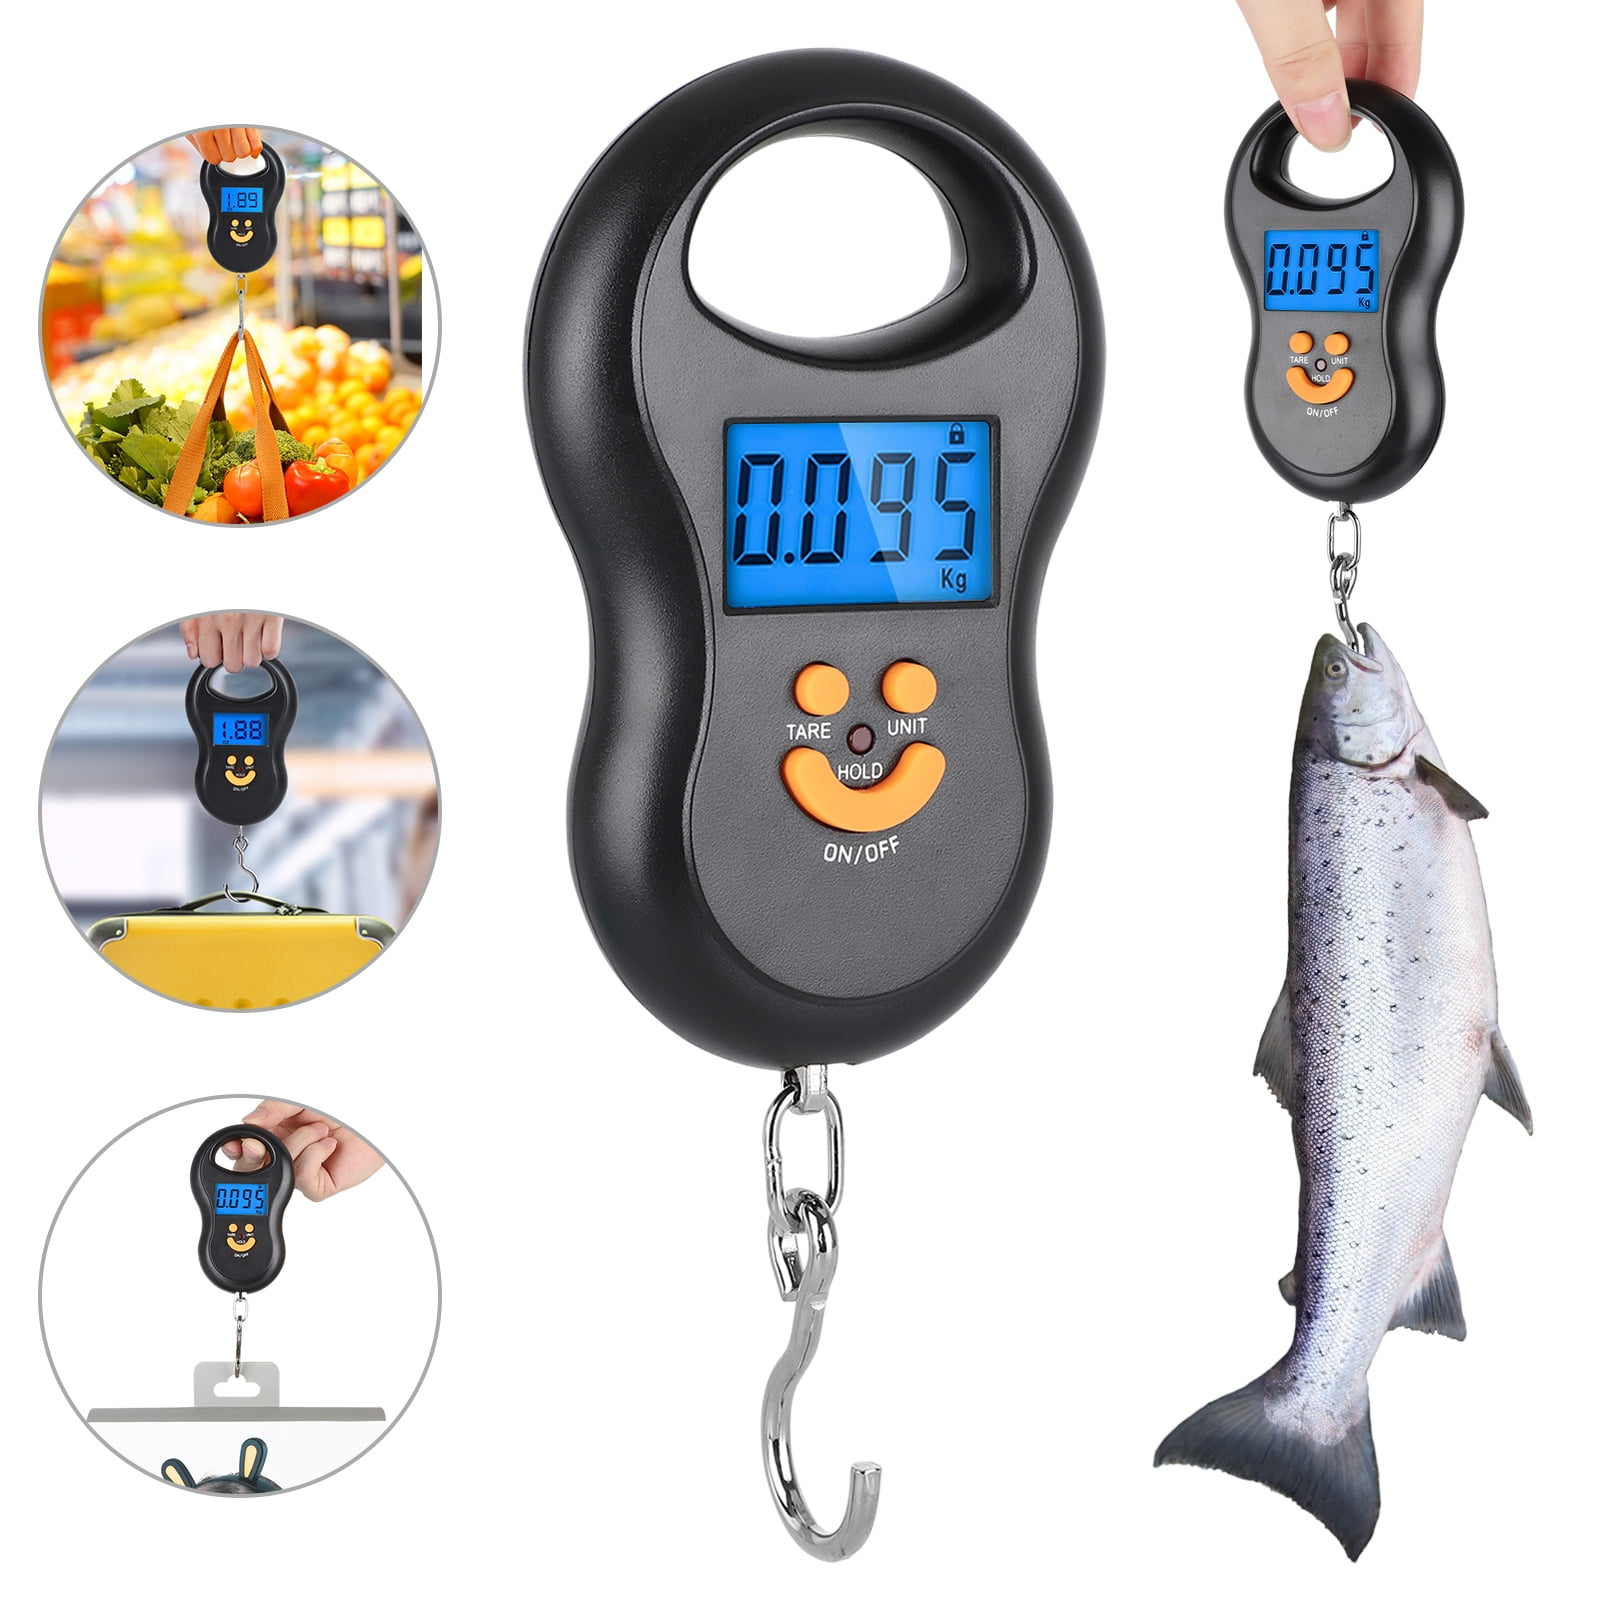 Portable Fish Scale Buy Online at the Best Price- 5 Core